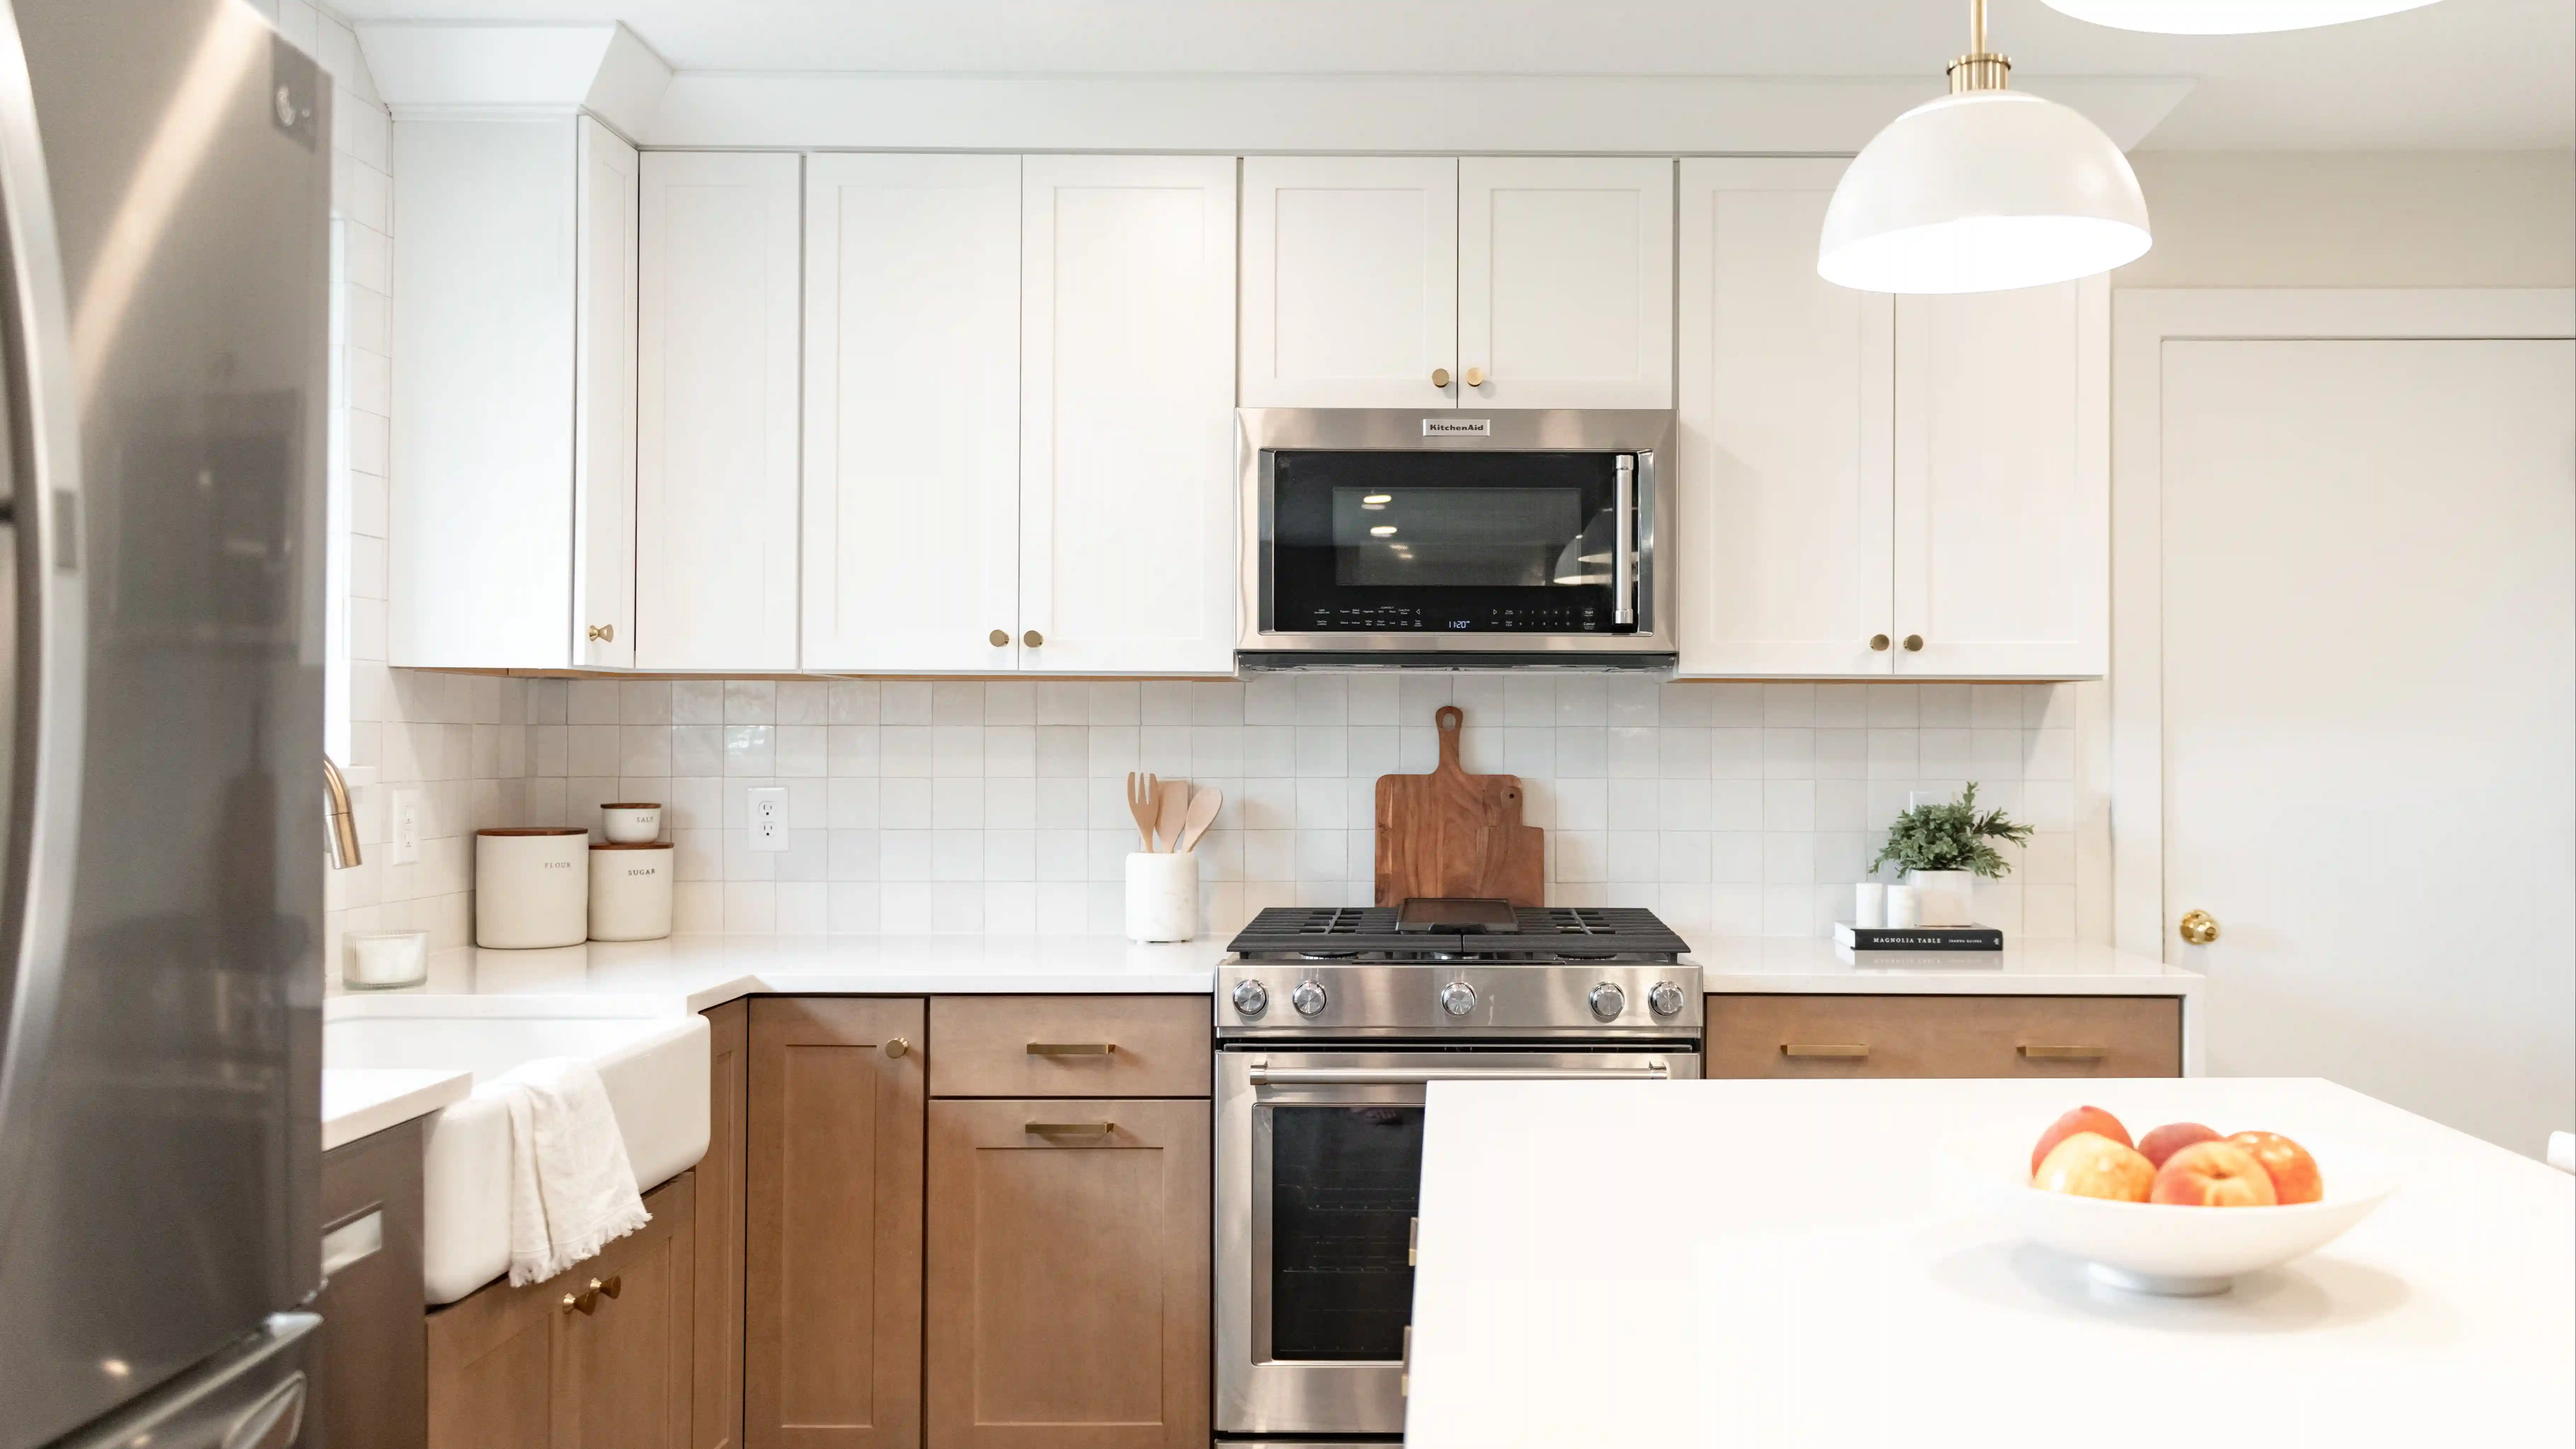 A kitchen with natural wood colored cabinetry, a white tile backsplash, and white quartz countertops. 